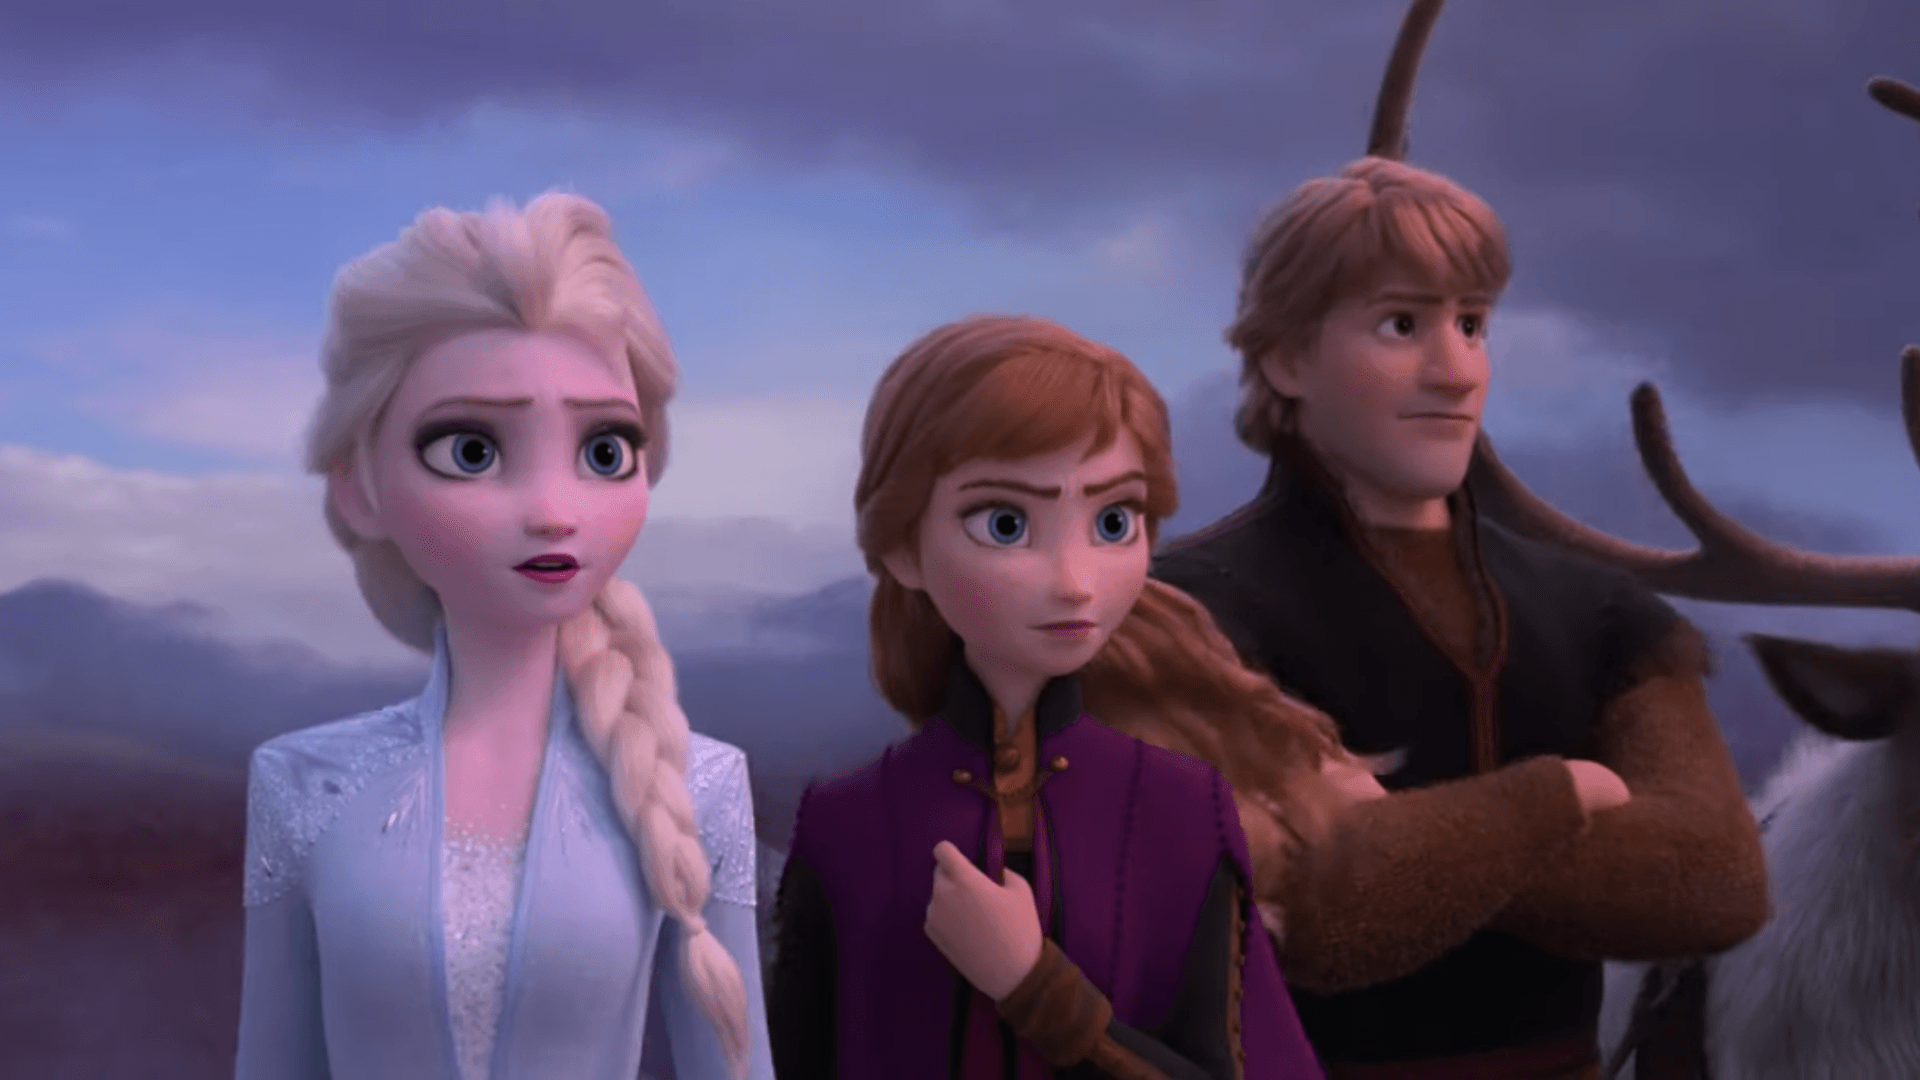 The 'Frozen 2' Was Watched More In The First 24